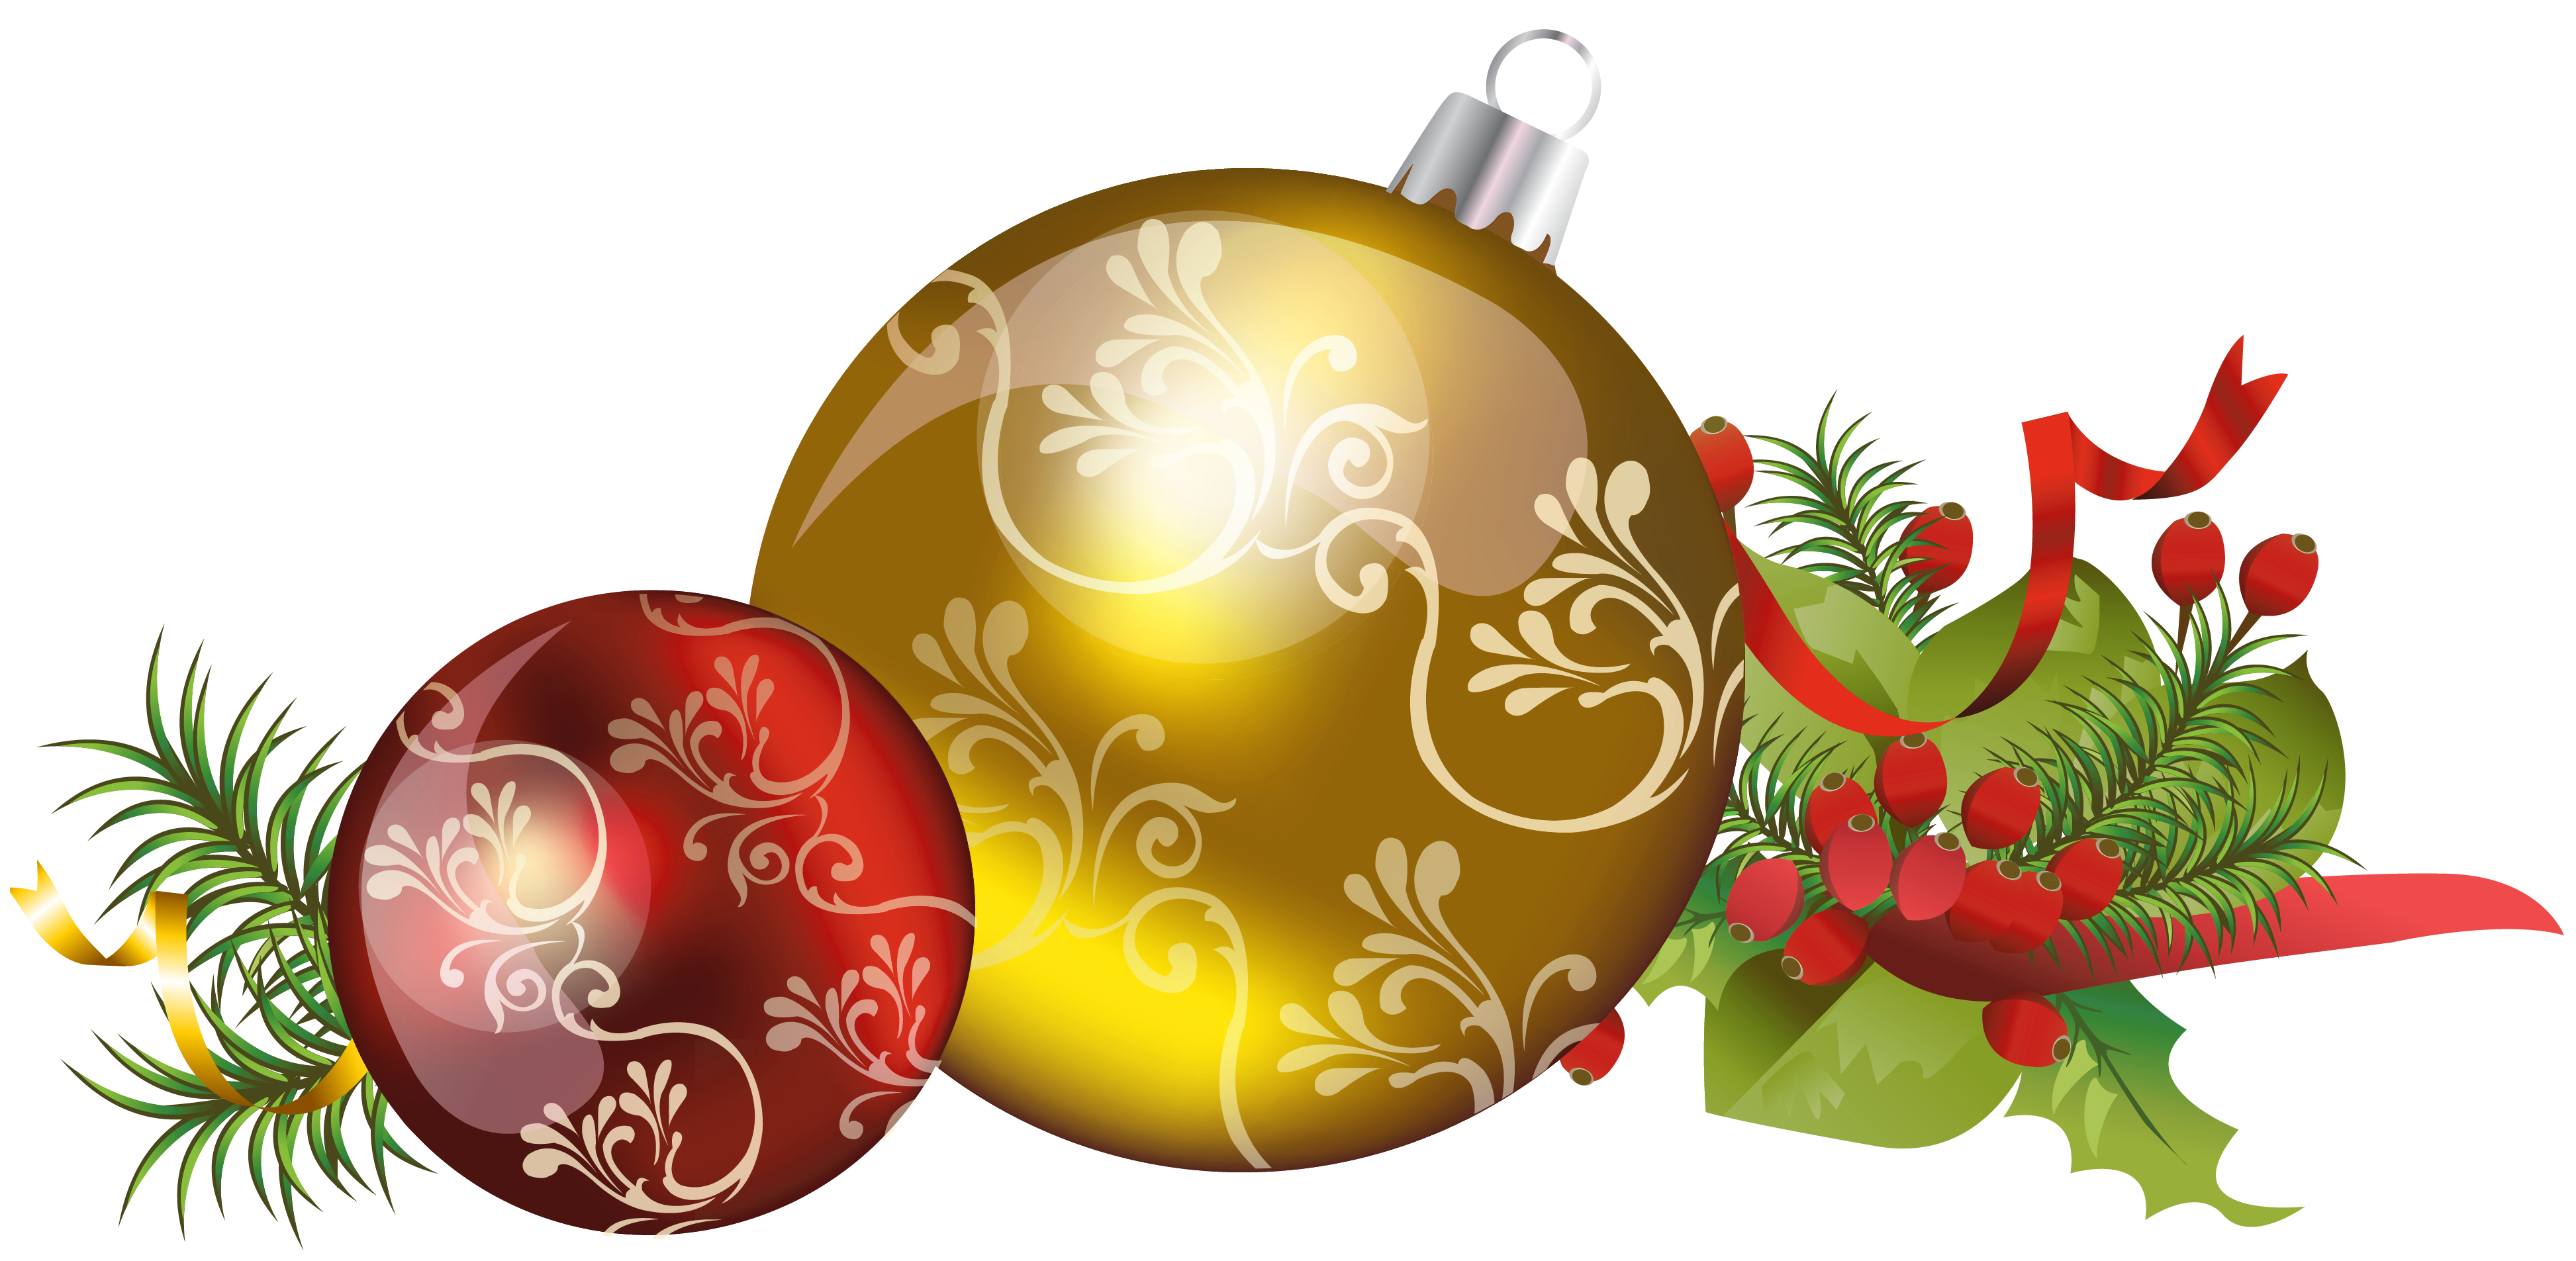 Christmas Balls with Ornaments PNG Picture | Gallery Yopriceville ...